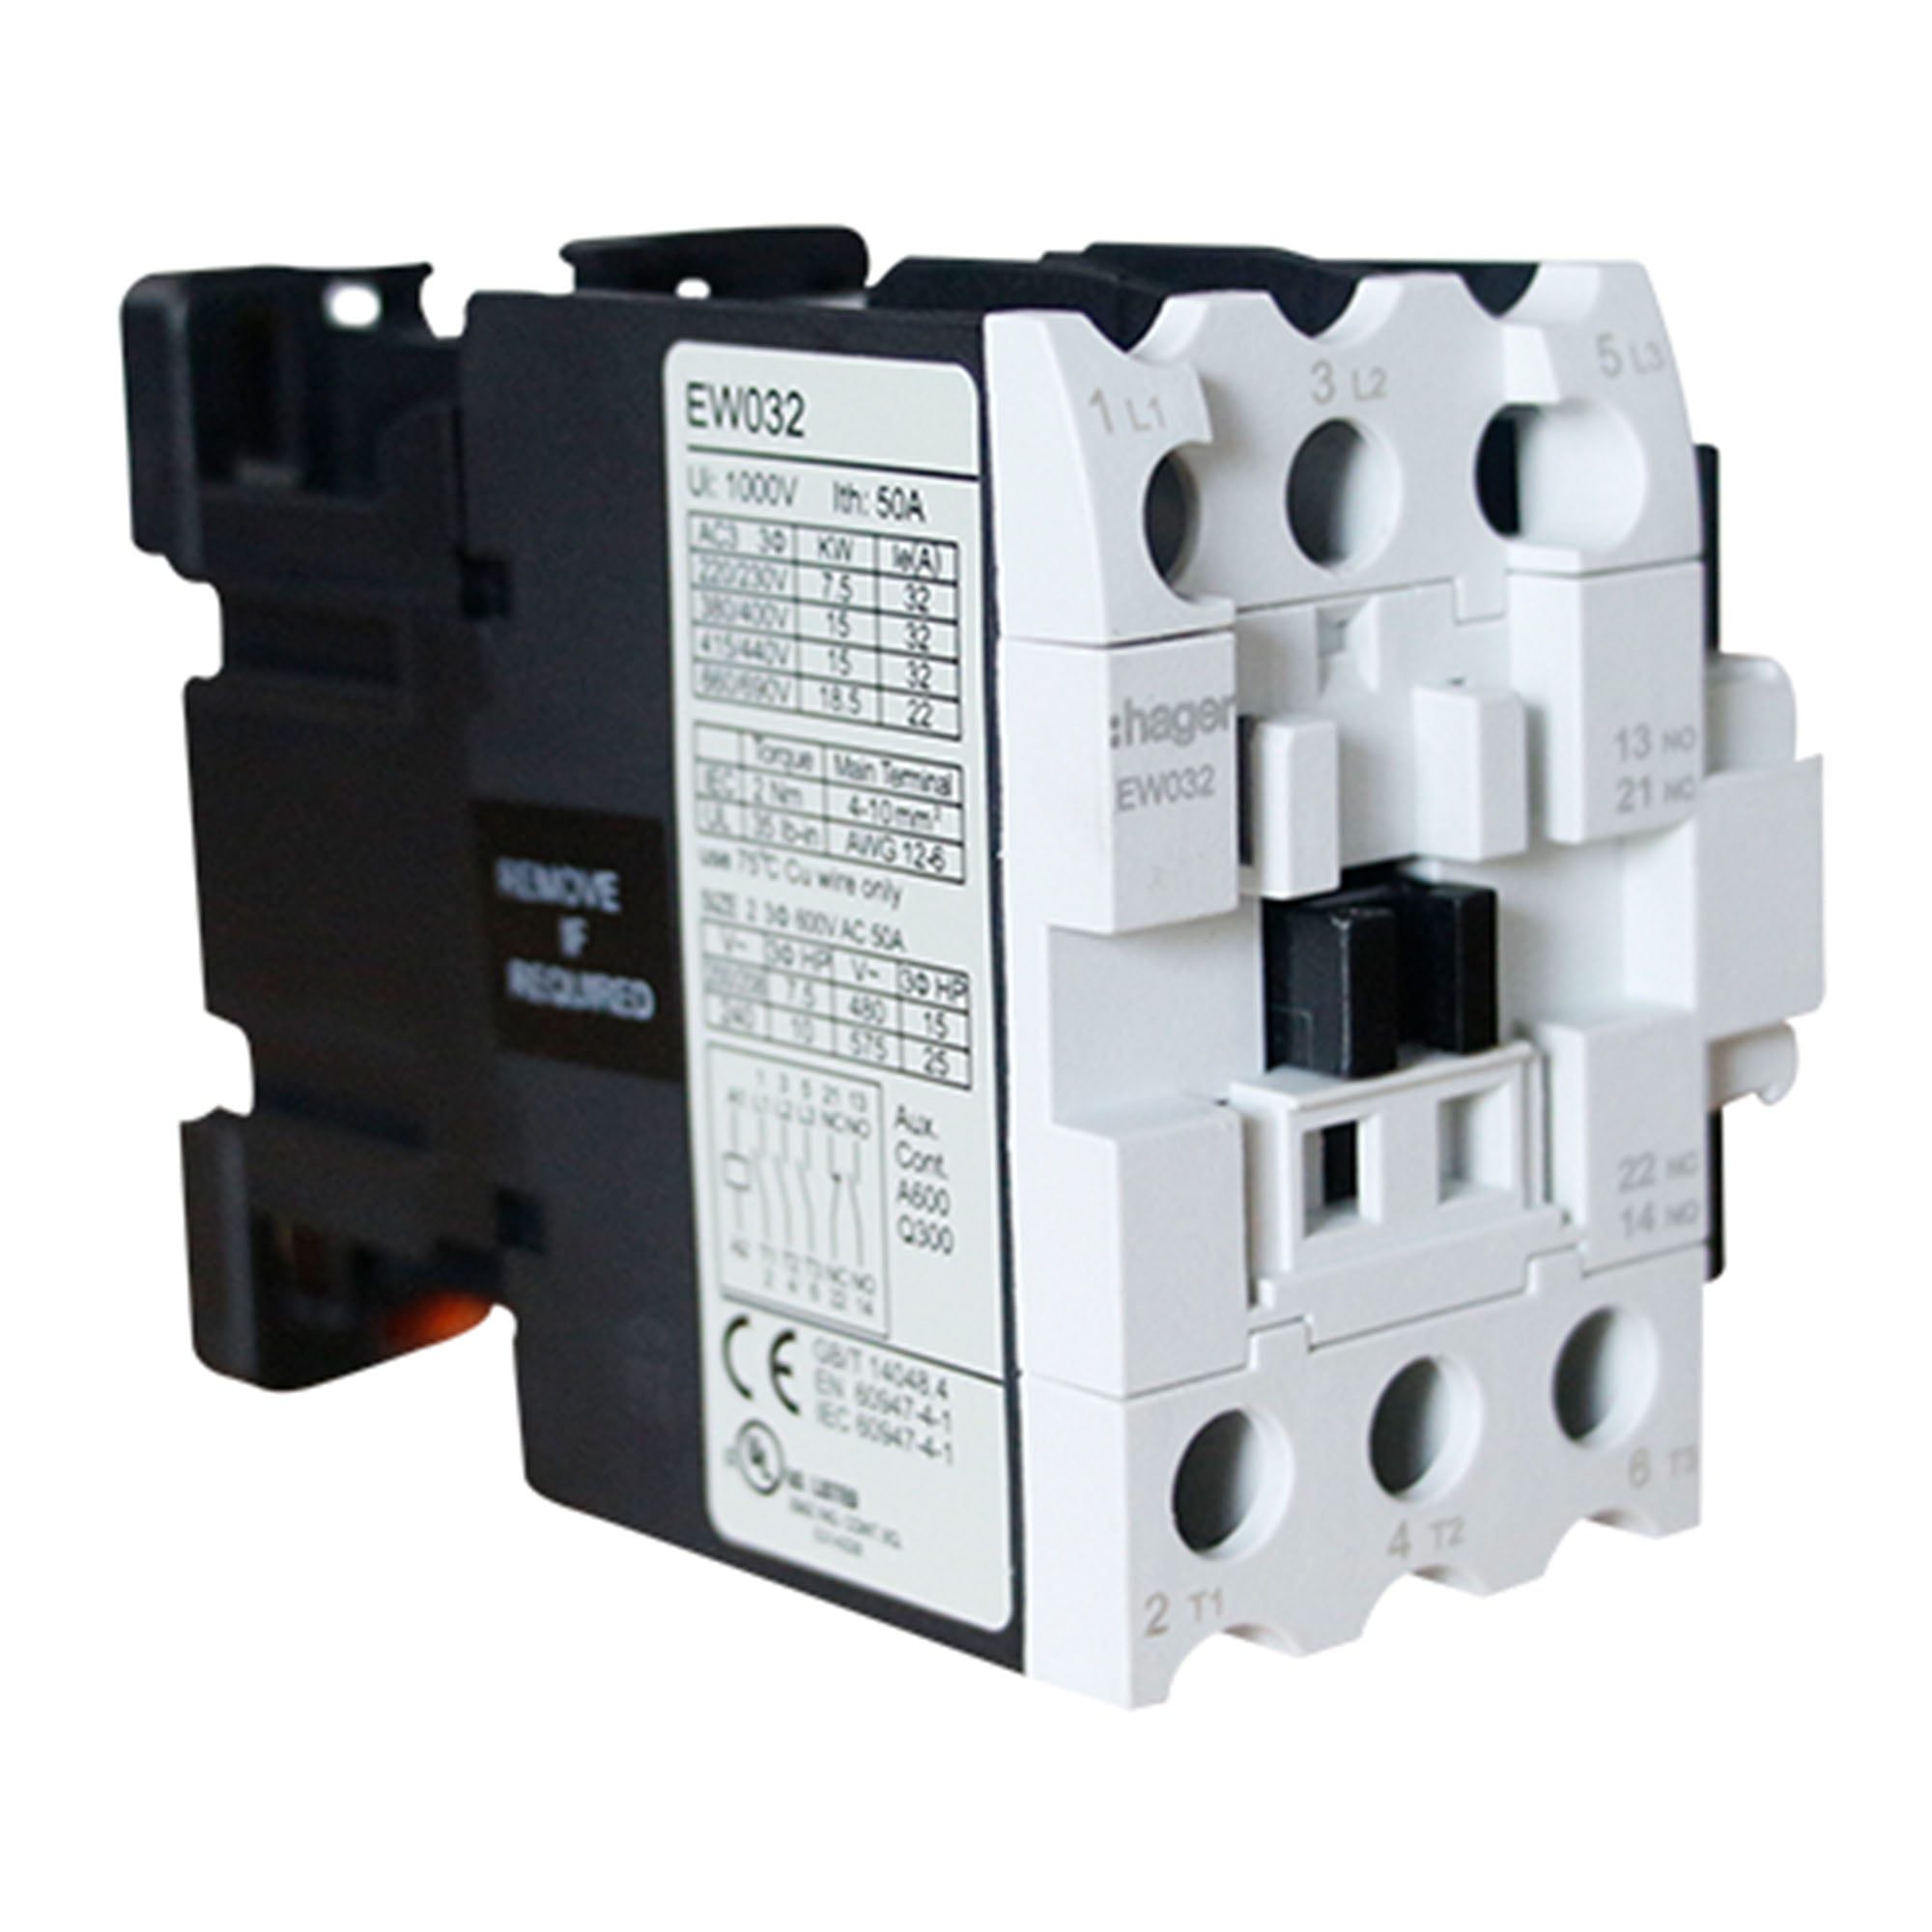 TOMA EMPOTRABLE 32AMP 3P+N+T 415V ROJO 6H IP67